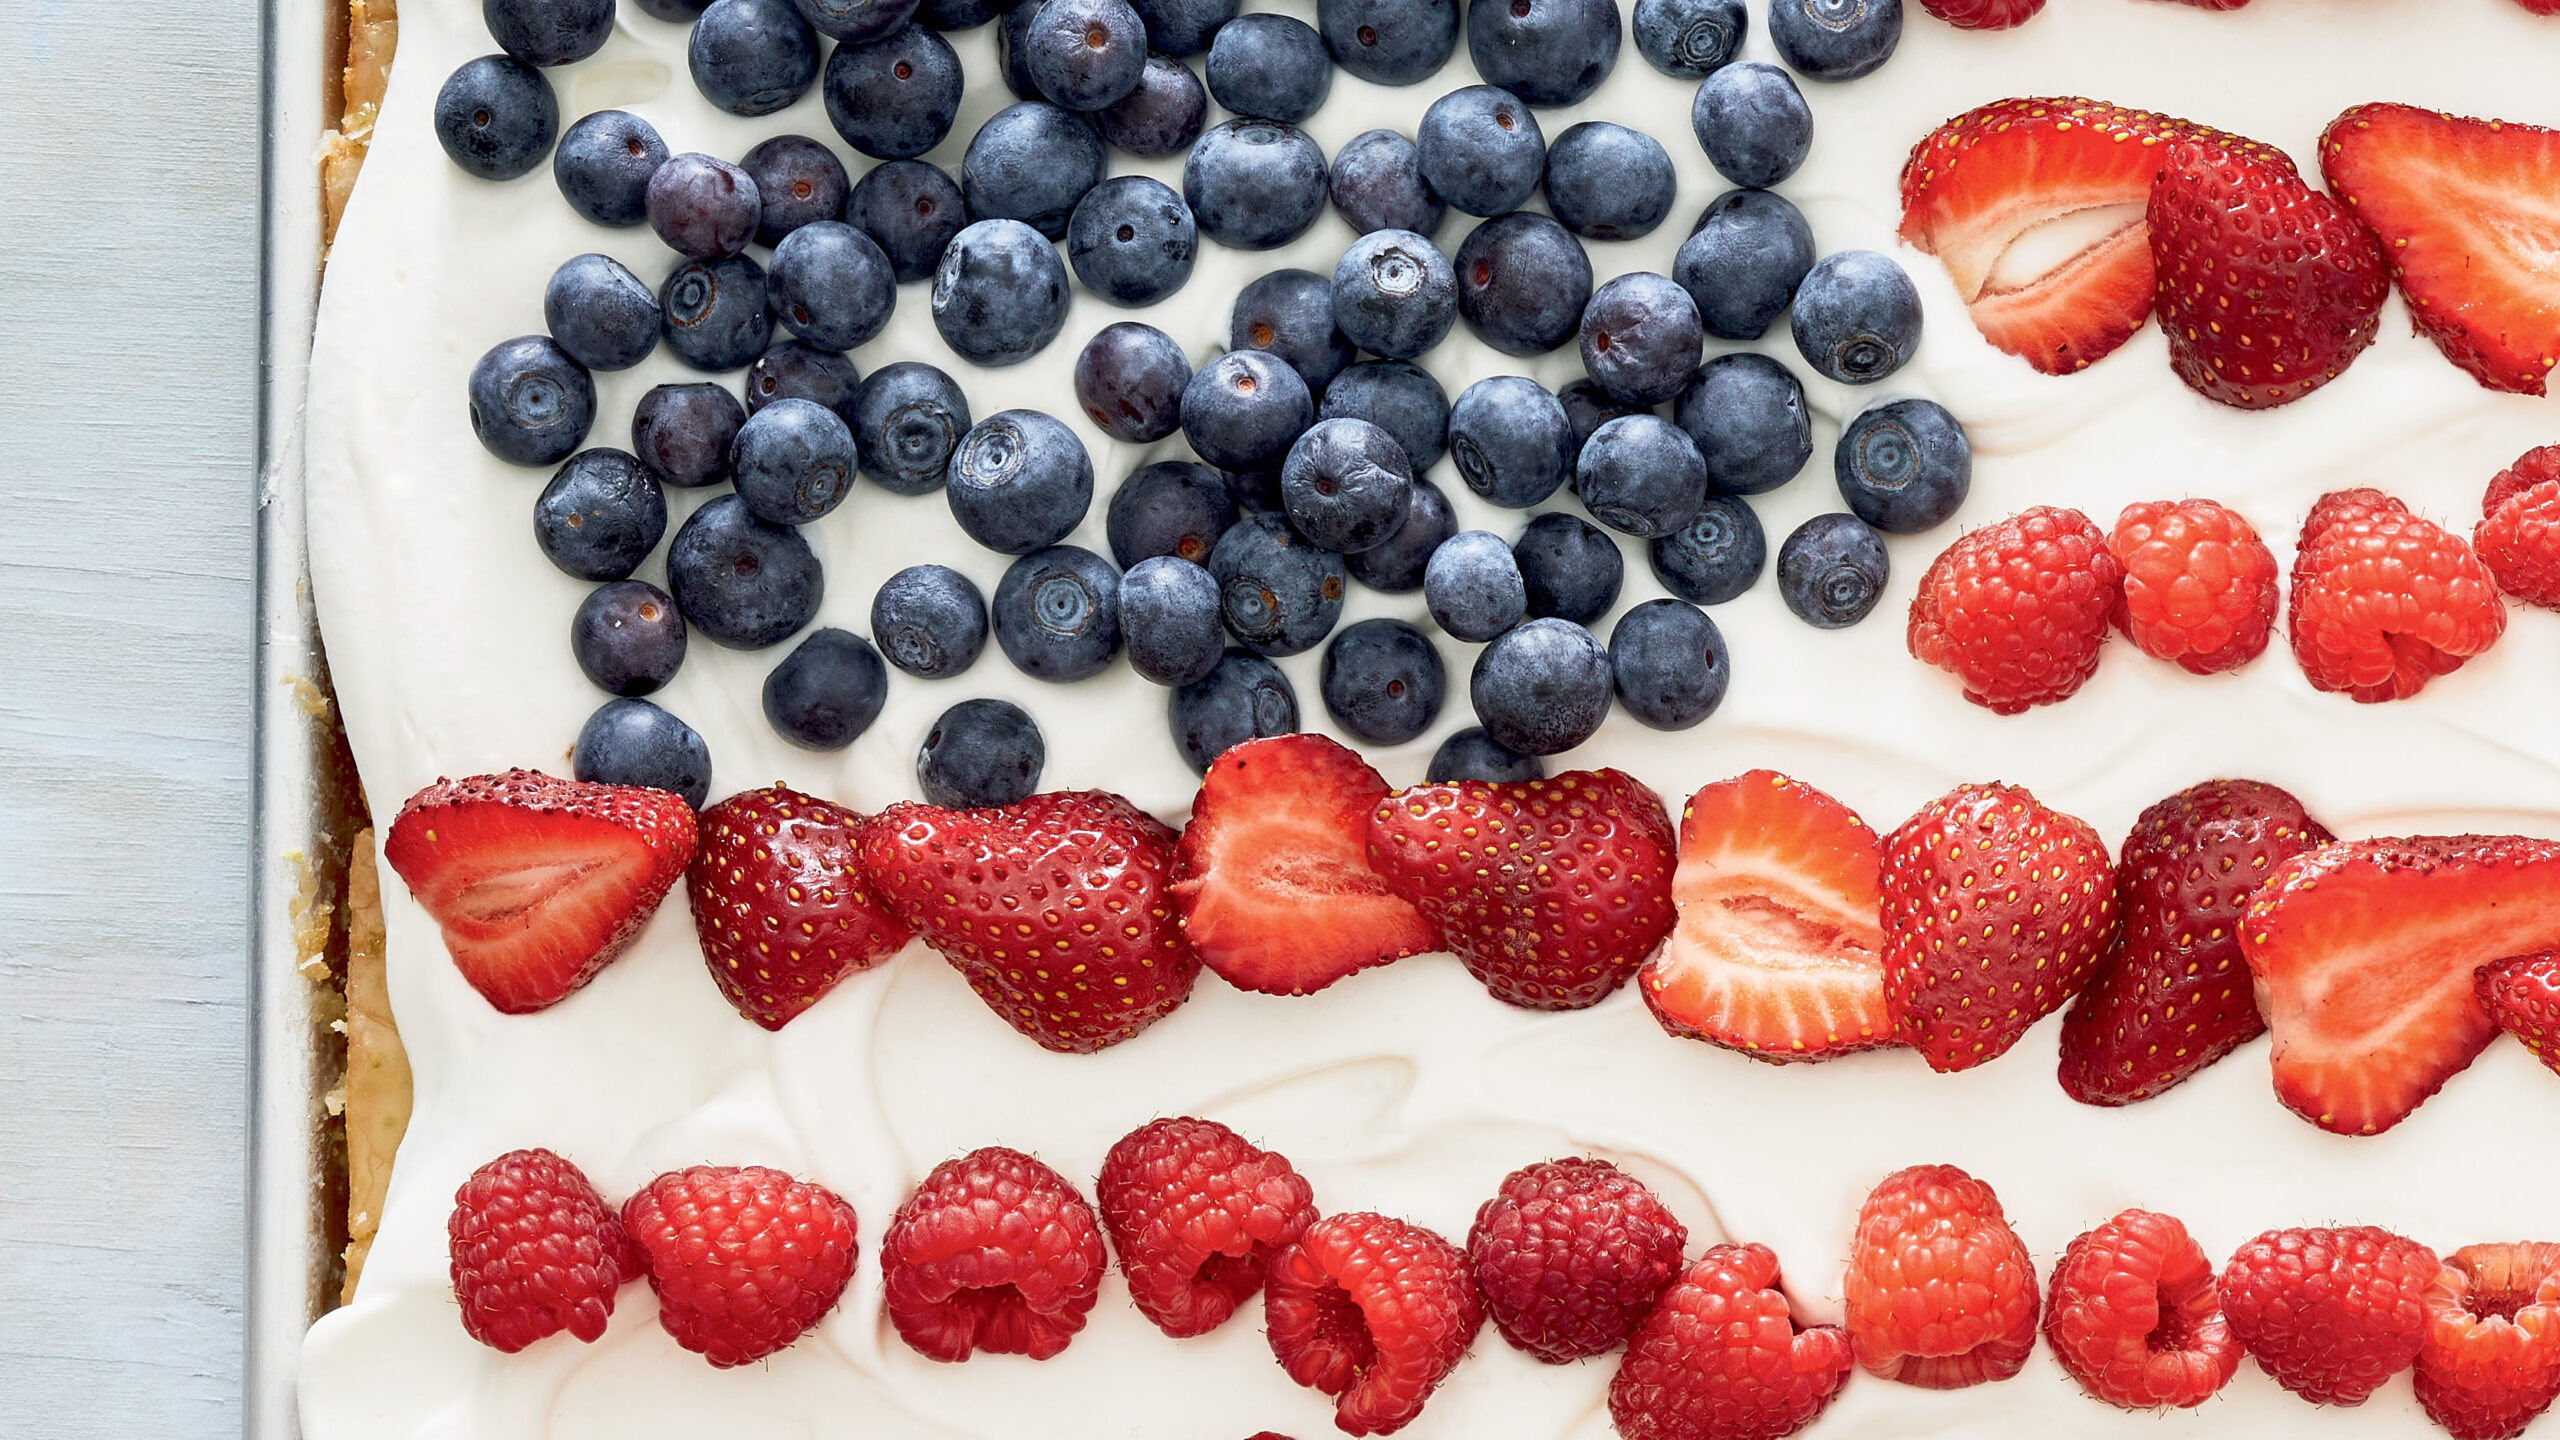 Giant Flag Cake recipe from Sheet Pan Sweets by Molly Gilbert